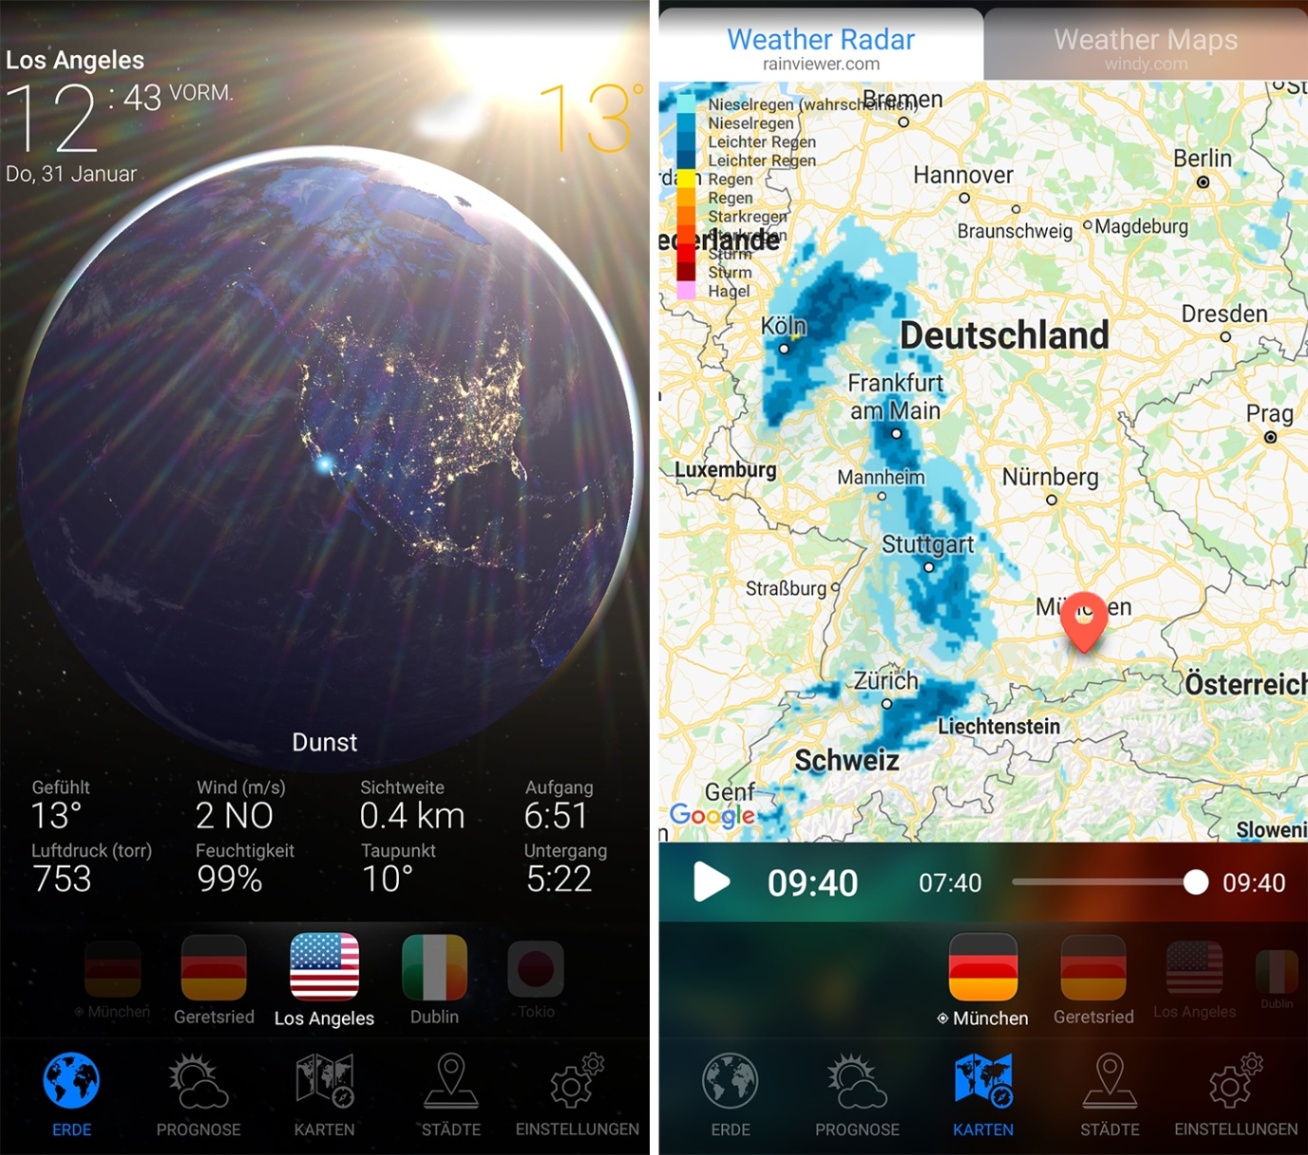 3D EARTH PRO - Accurate Weather Conditions and Forecasts